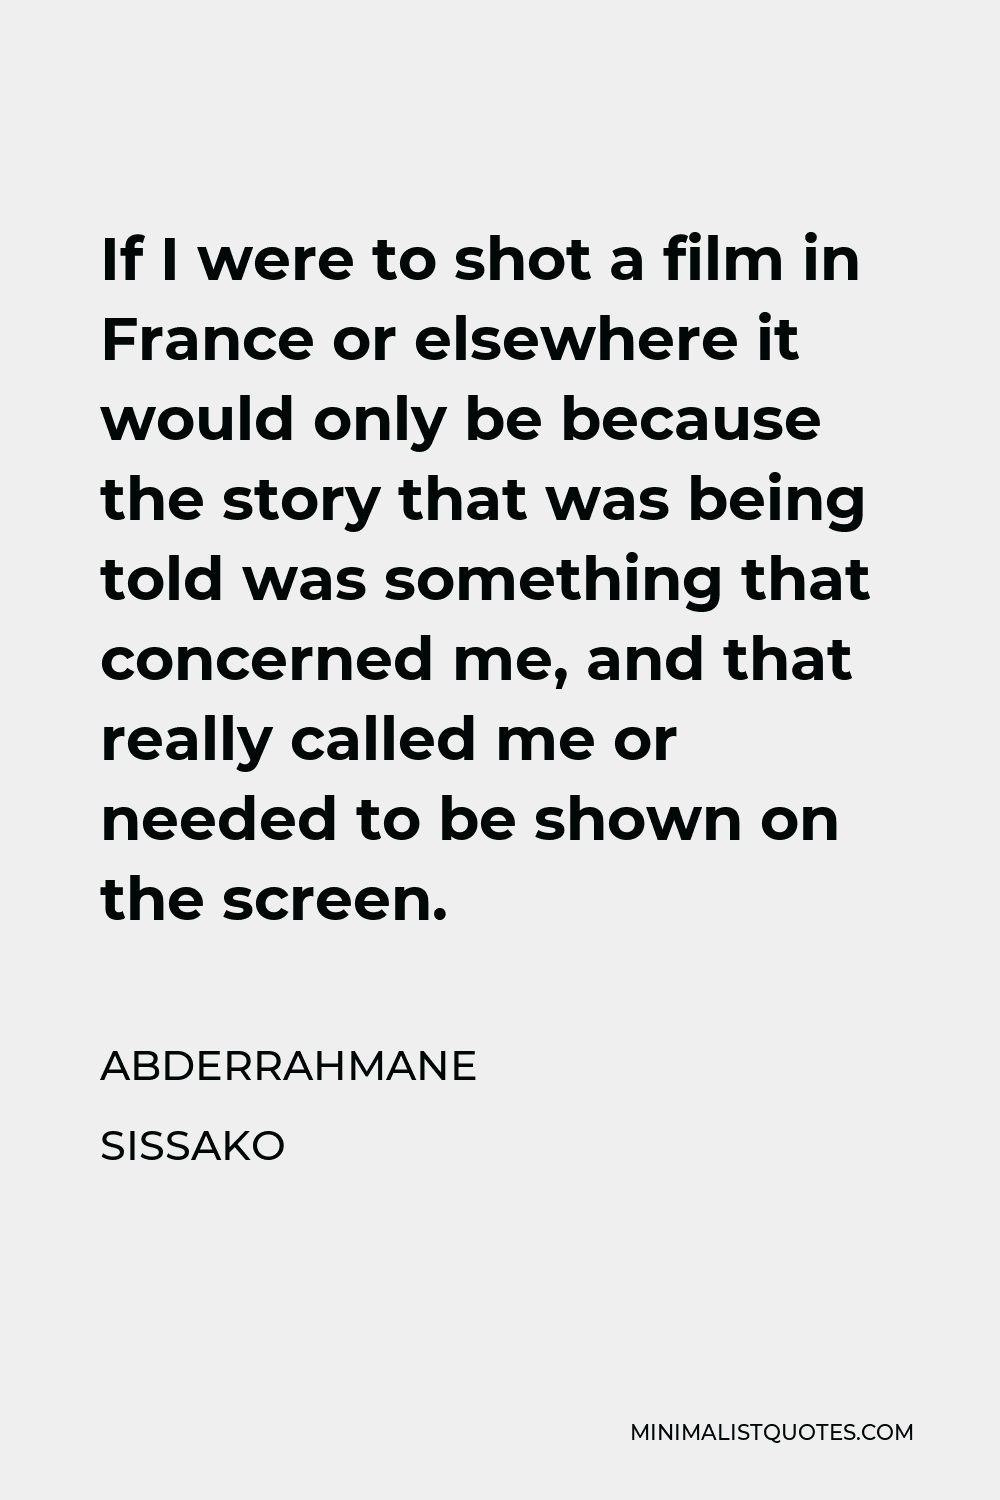 Abderrahmane Sissako Quote - If I were to shot a film in France or elsewhere it would only be because the story that was being told was something that concerned me, and that really called me or needed to be shown on the screen.